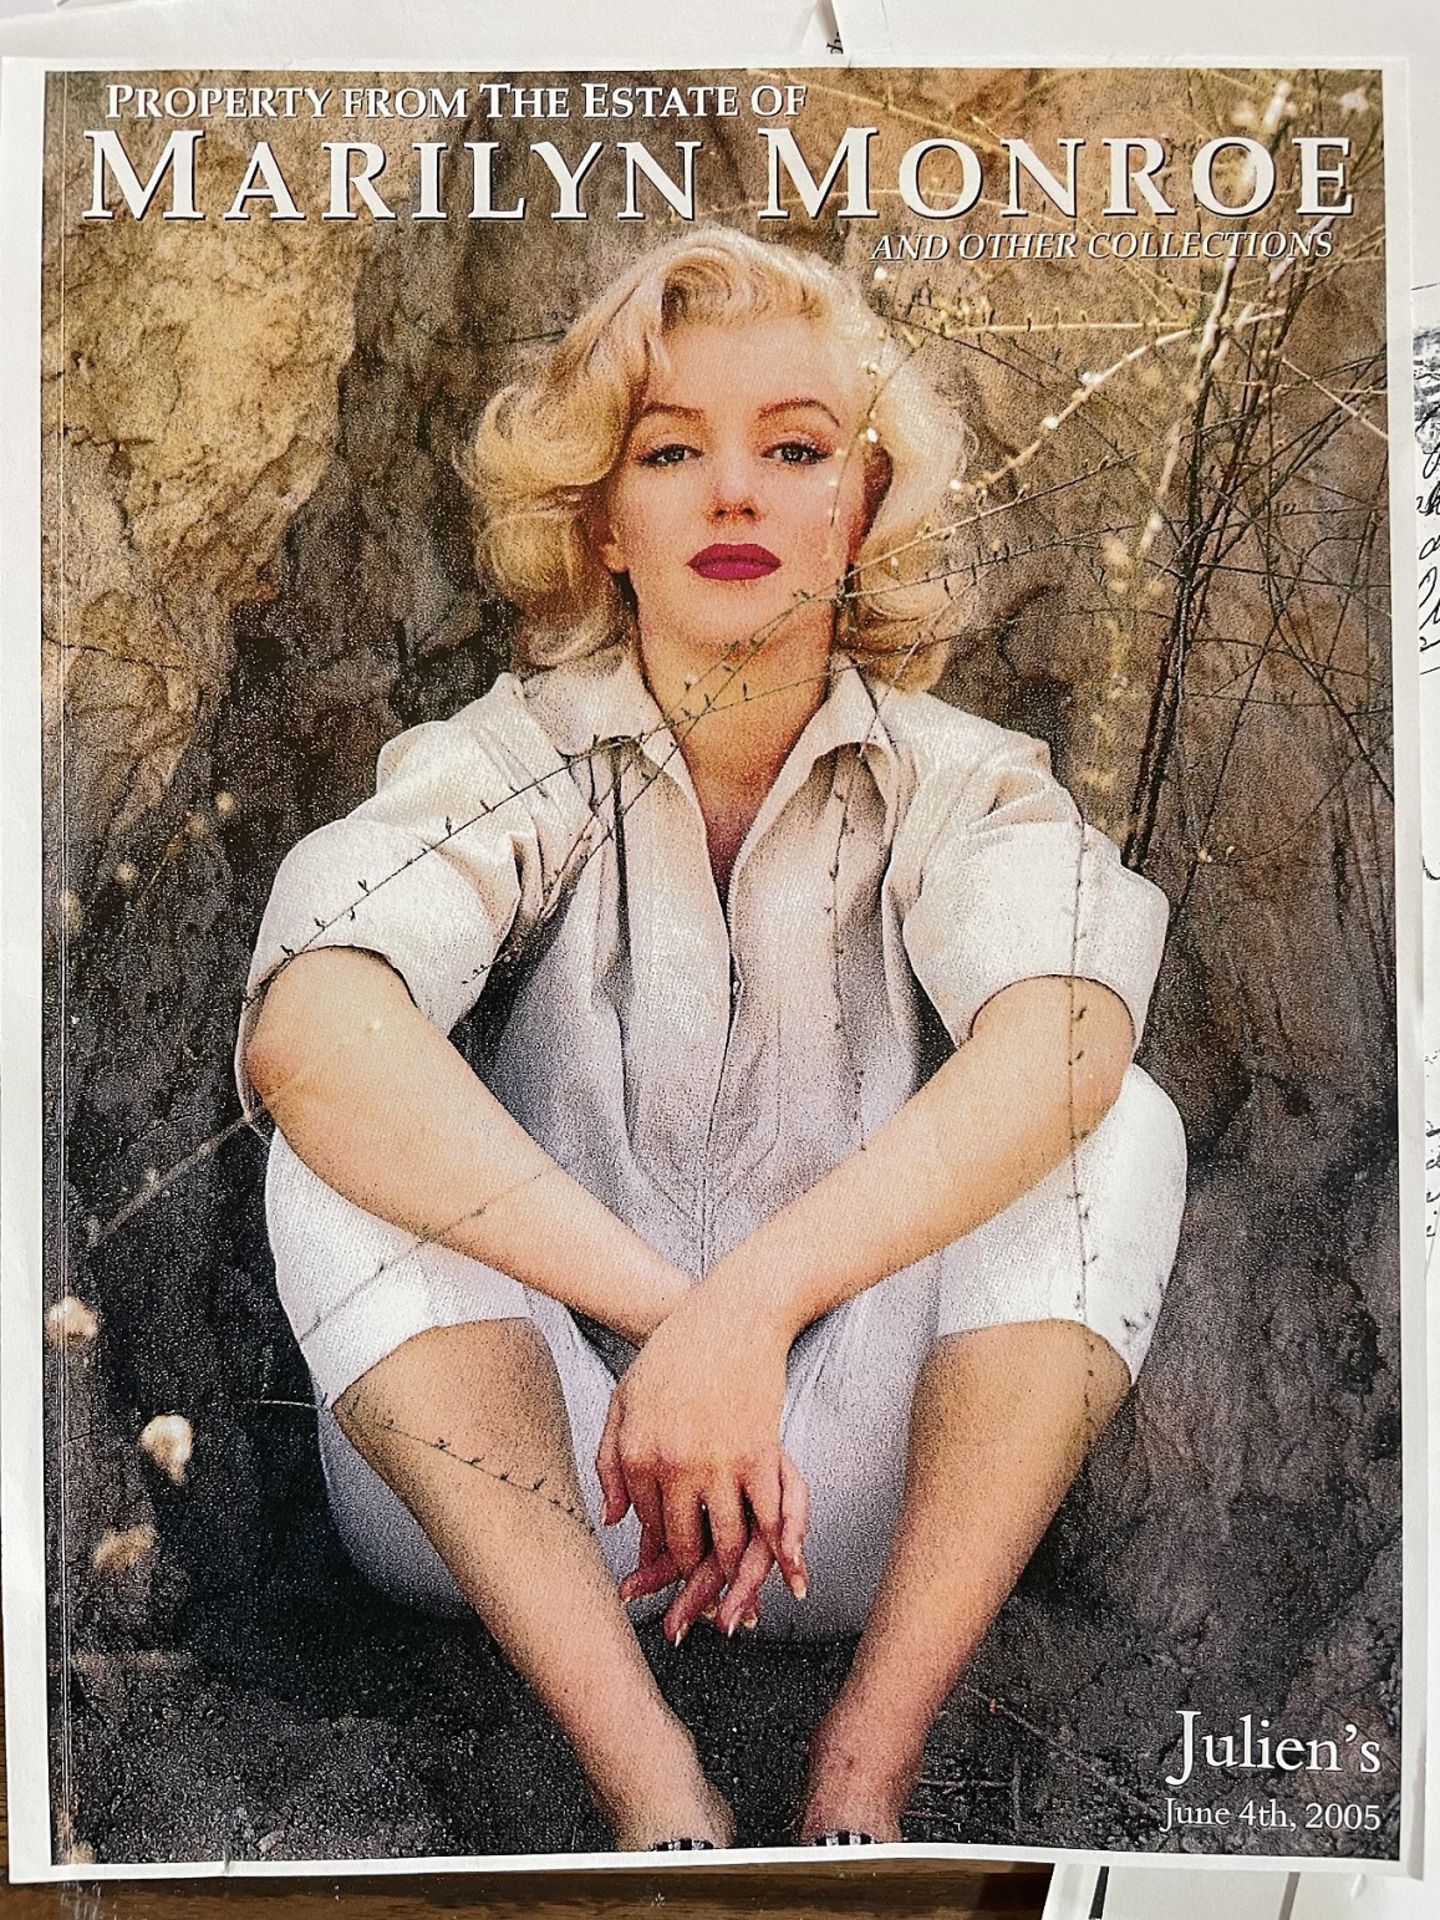 [MONROE MARILYN]: (1926-1962) American actress and sex symbol. - Image 2 of 4